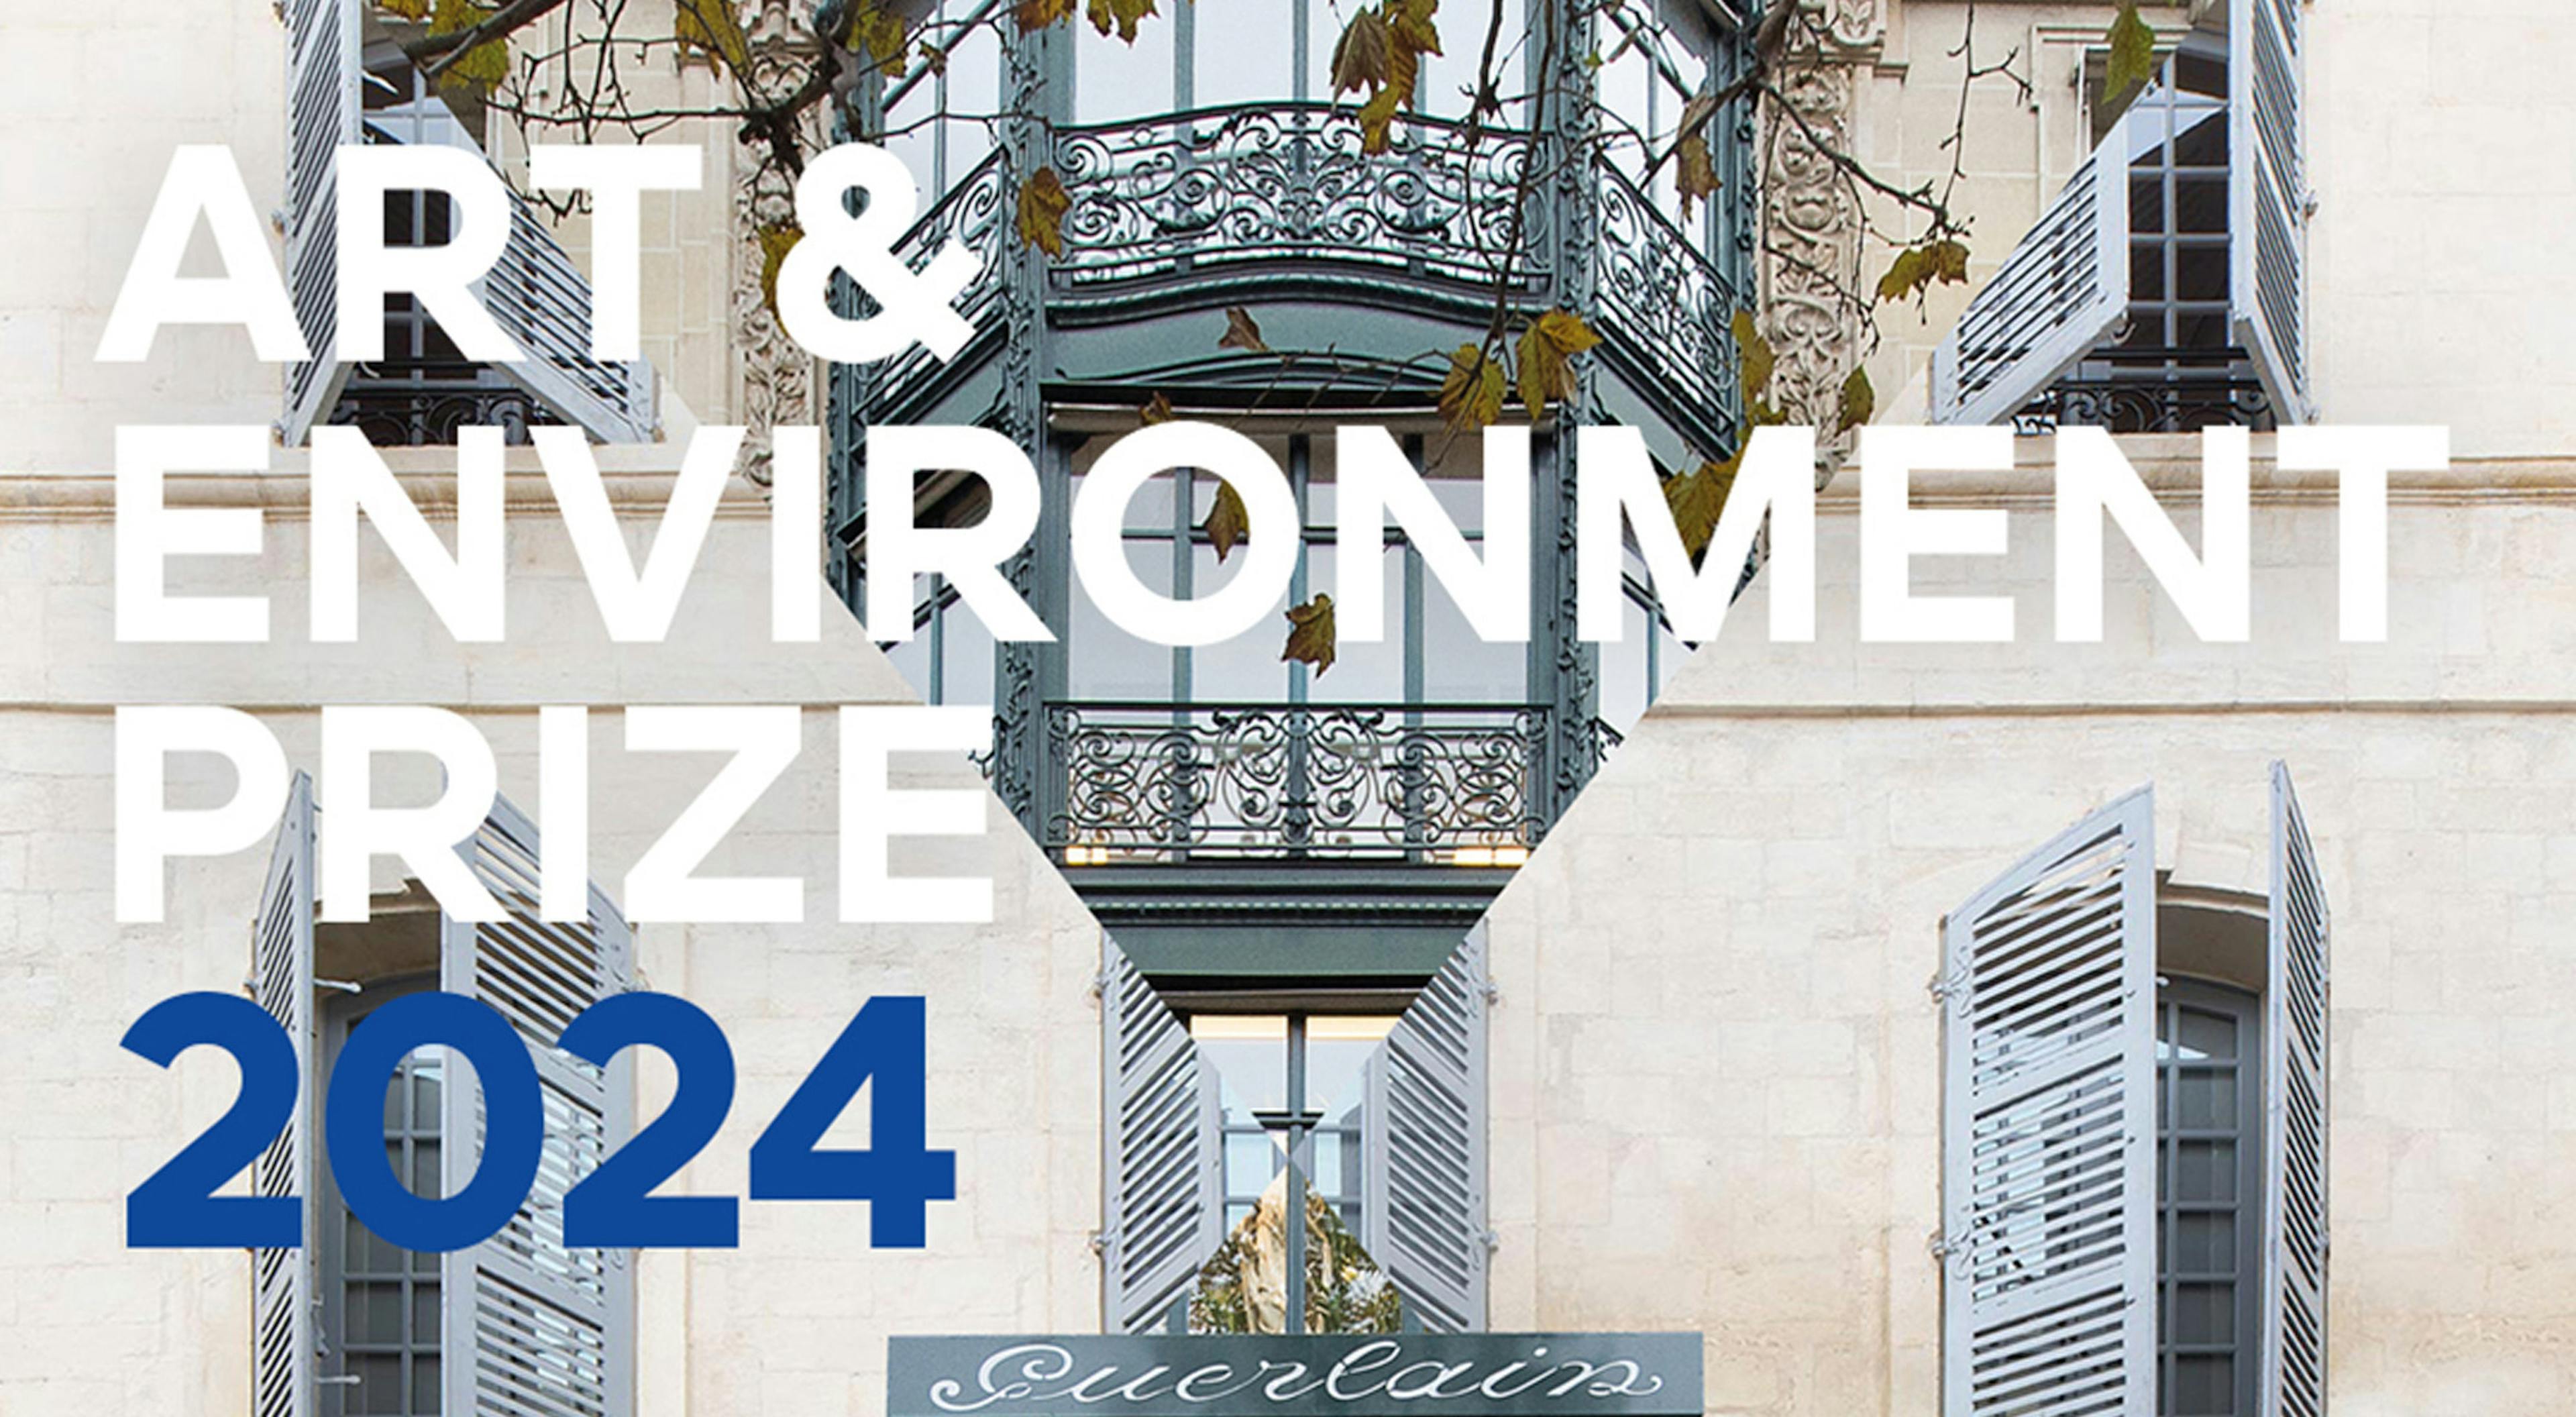 Cover Lee Ufan Arles and Guerlain launch 2nd edition of Art & Environment Prize